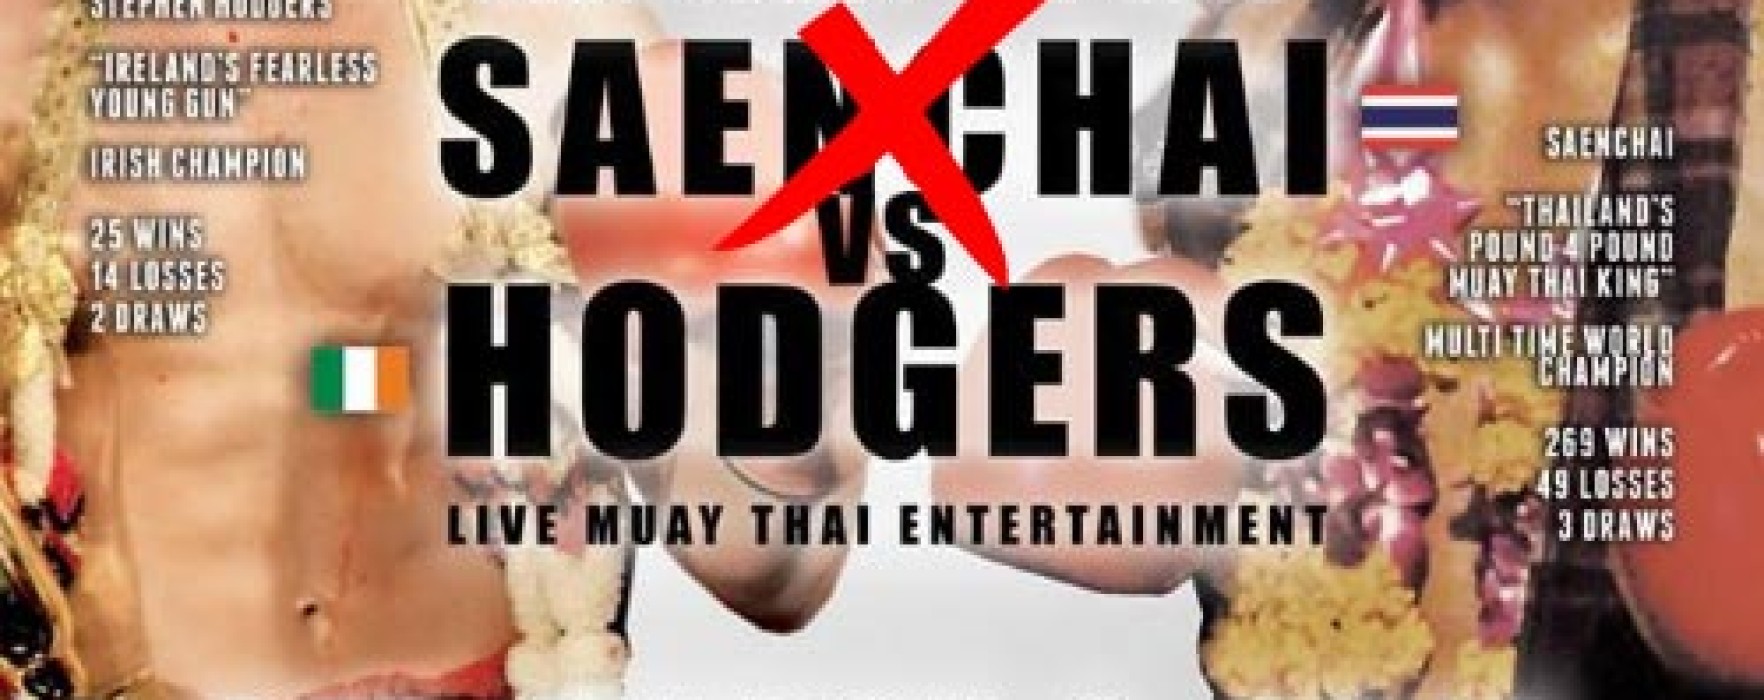 Video: Saenchai replaced by Komkit Chanawong in the fight against Stephen Hodgers!